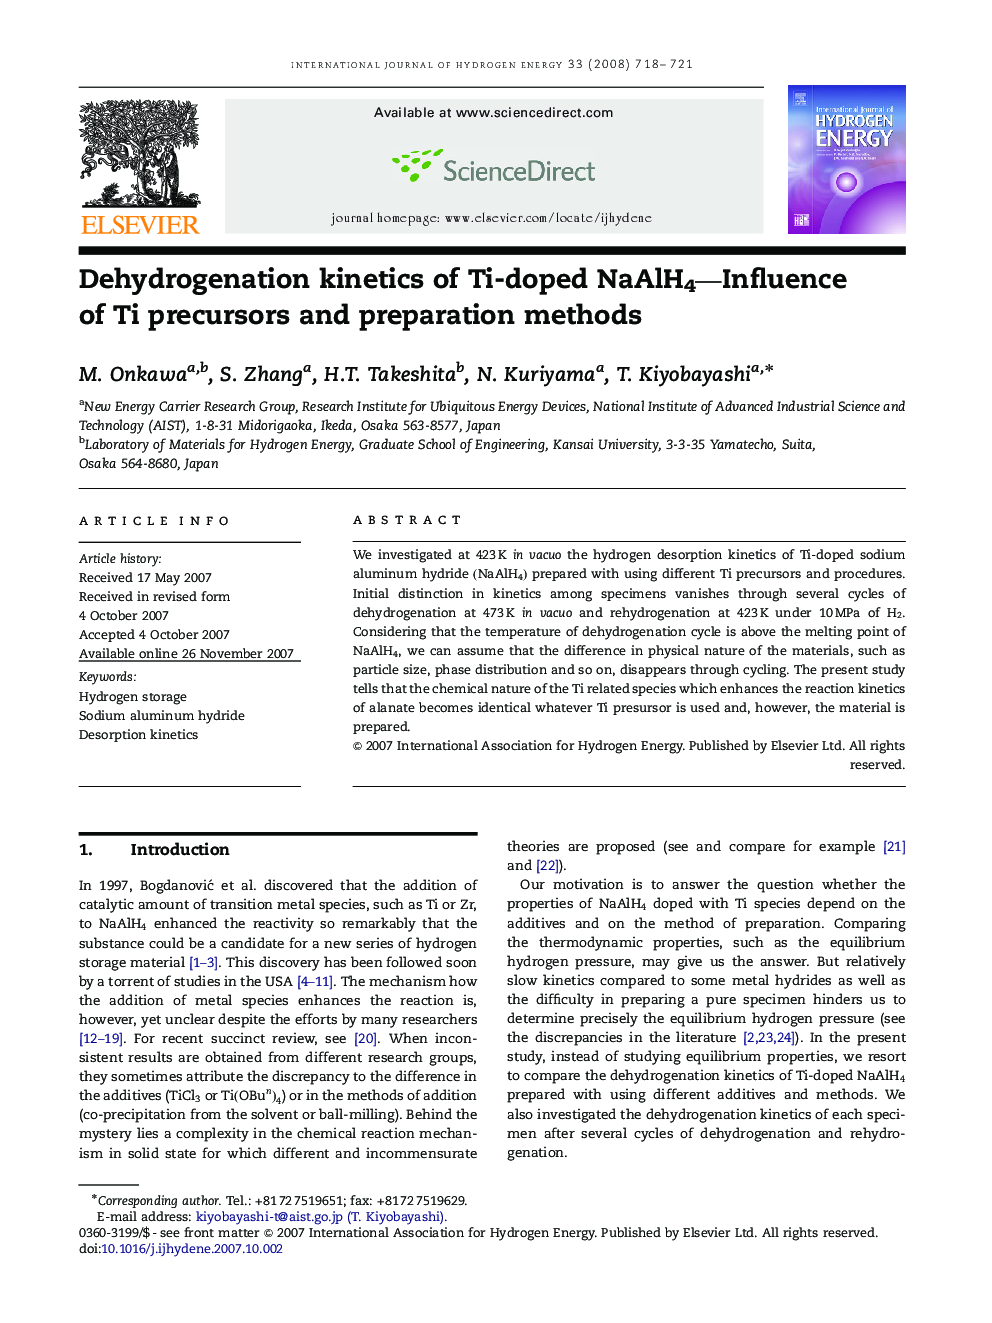 Dehydrogenation kinetics of Ti-doped NaAlH4—Influence of Ti precursors and preparation methods